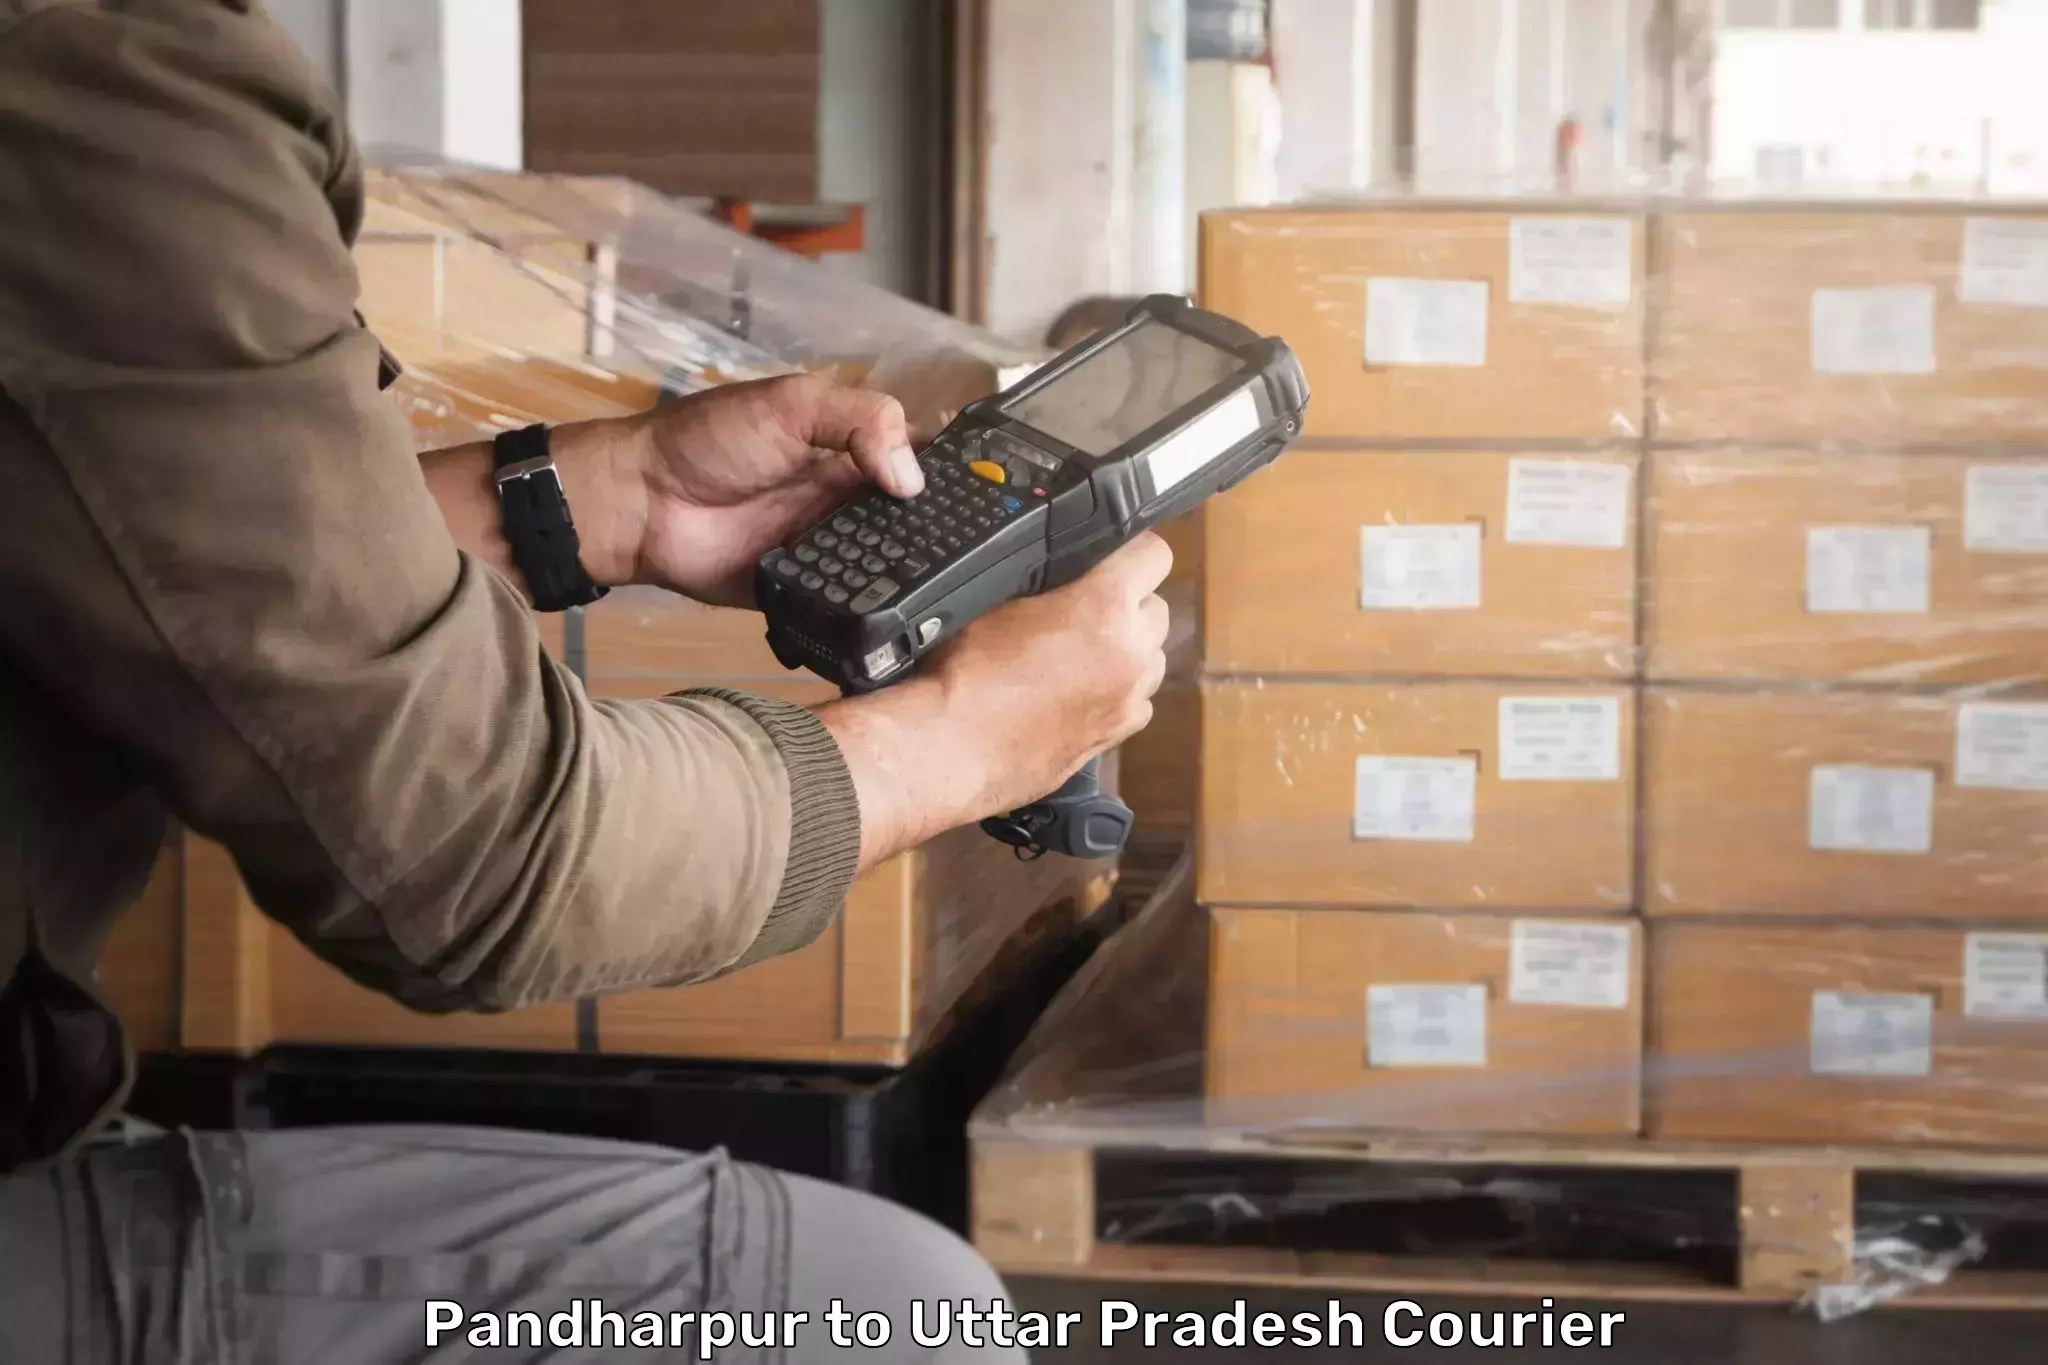 Cost-effective courier options Pandharpur to Allahabad